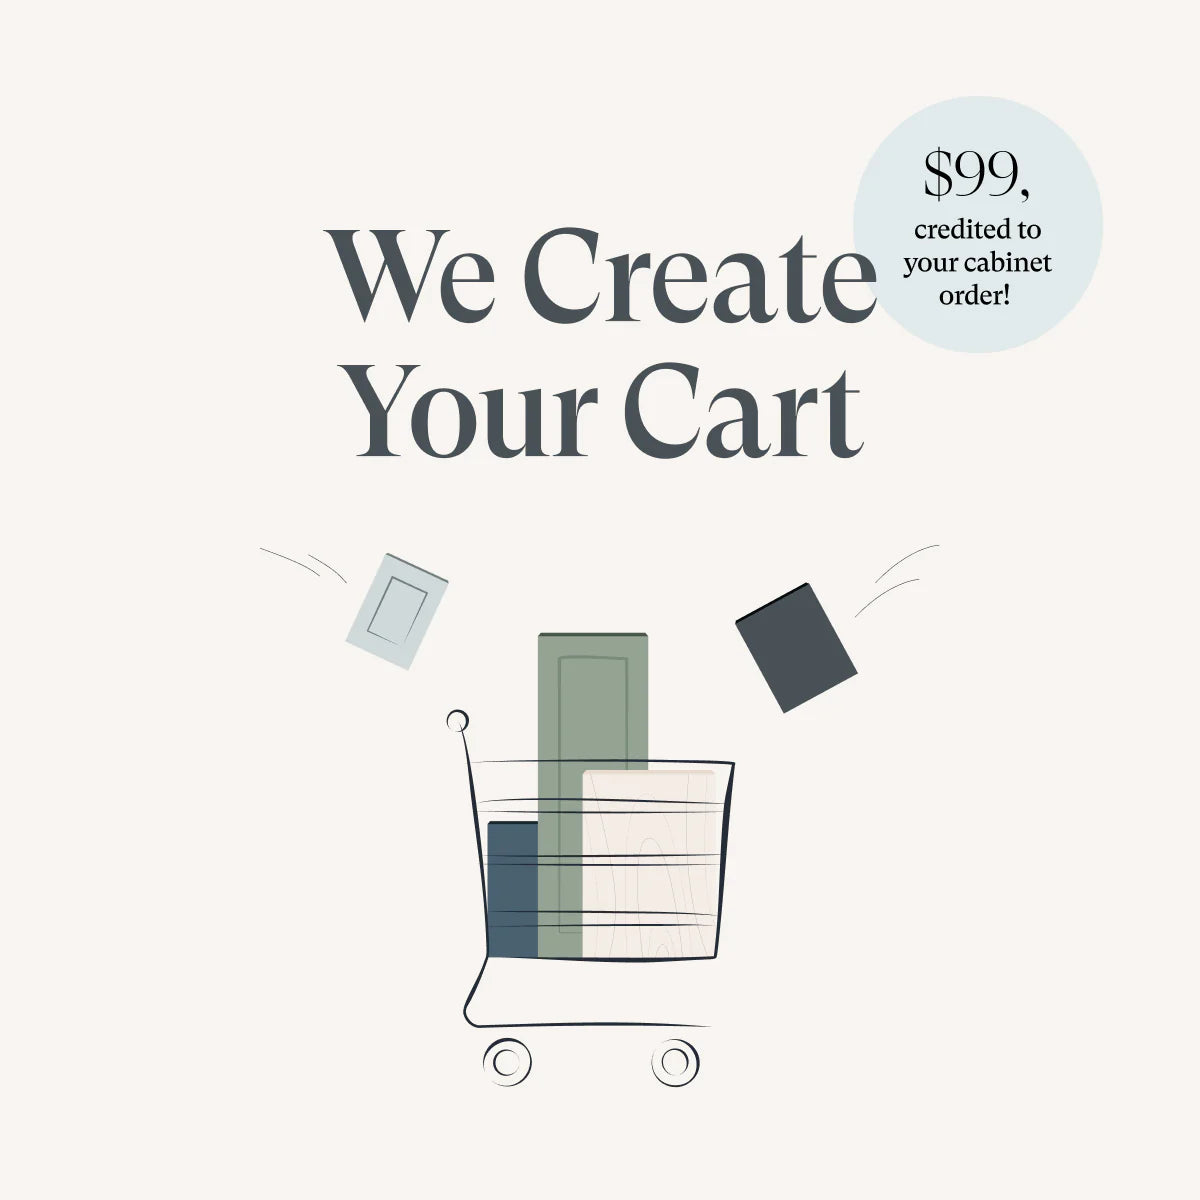 We Create Your Cart